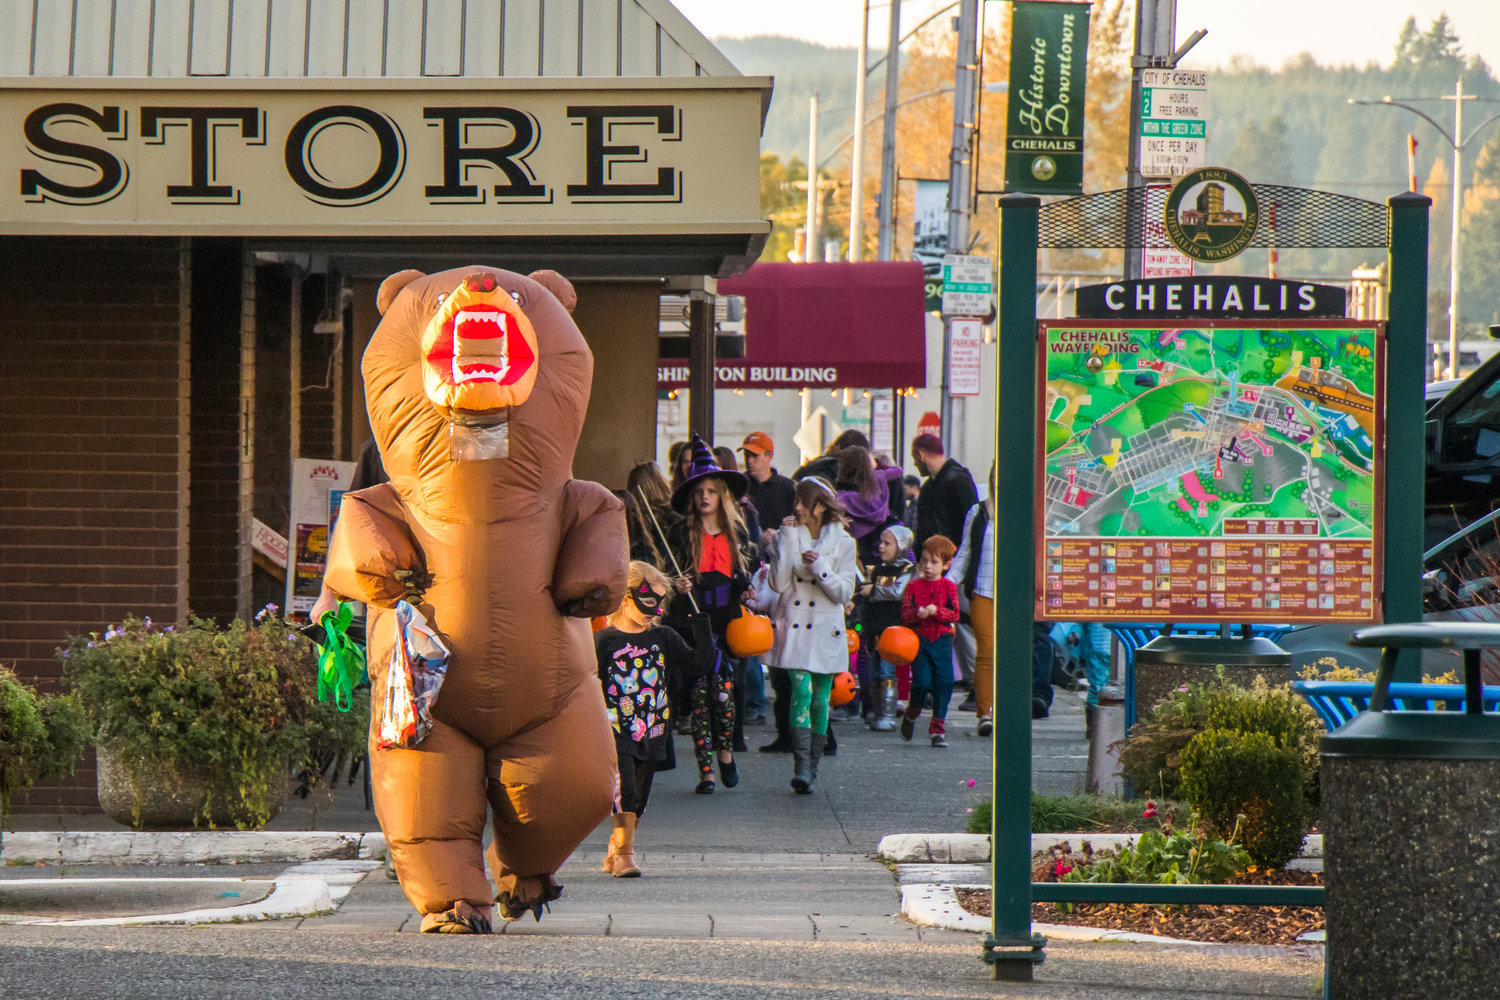 FILE PHOTO — Isaiah Grady sports a blowup bear costume as he runs down the sidewalk during Halloween festivities in Chehalis in 2019.